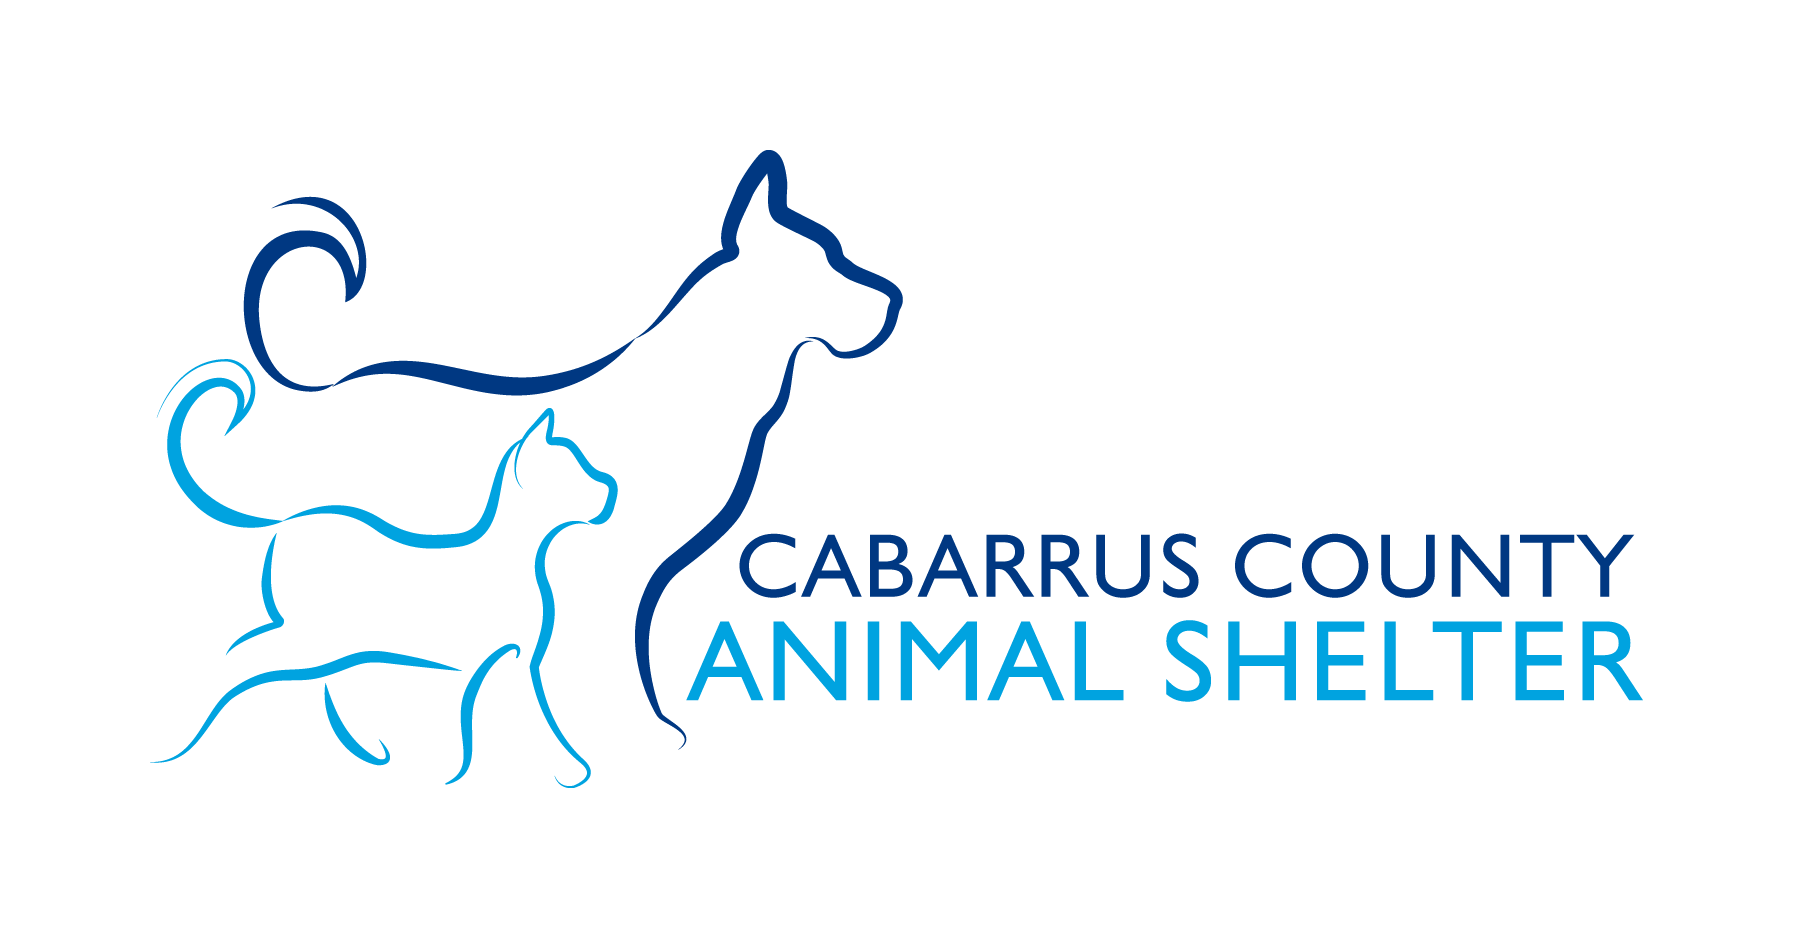 Cabarrus County Animal Shelter